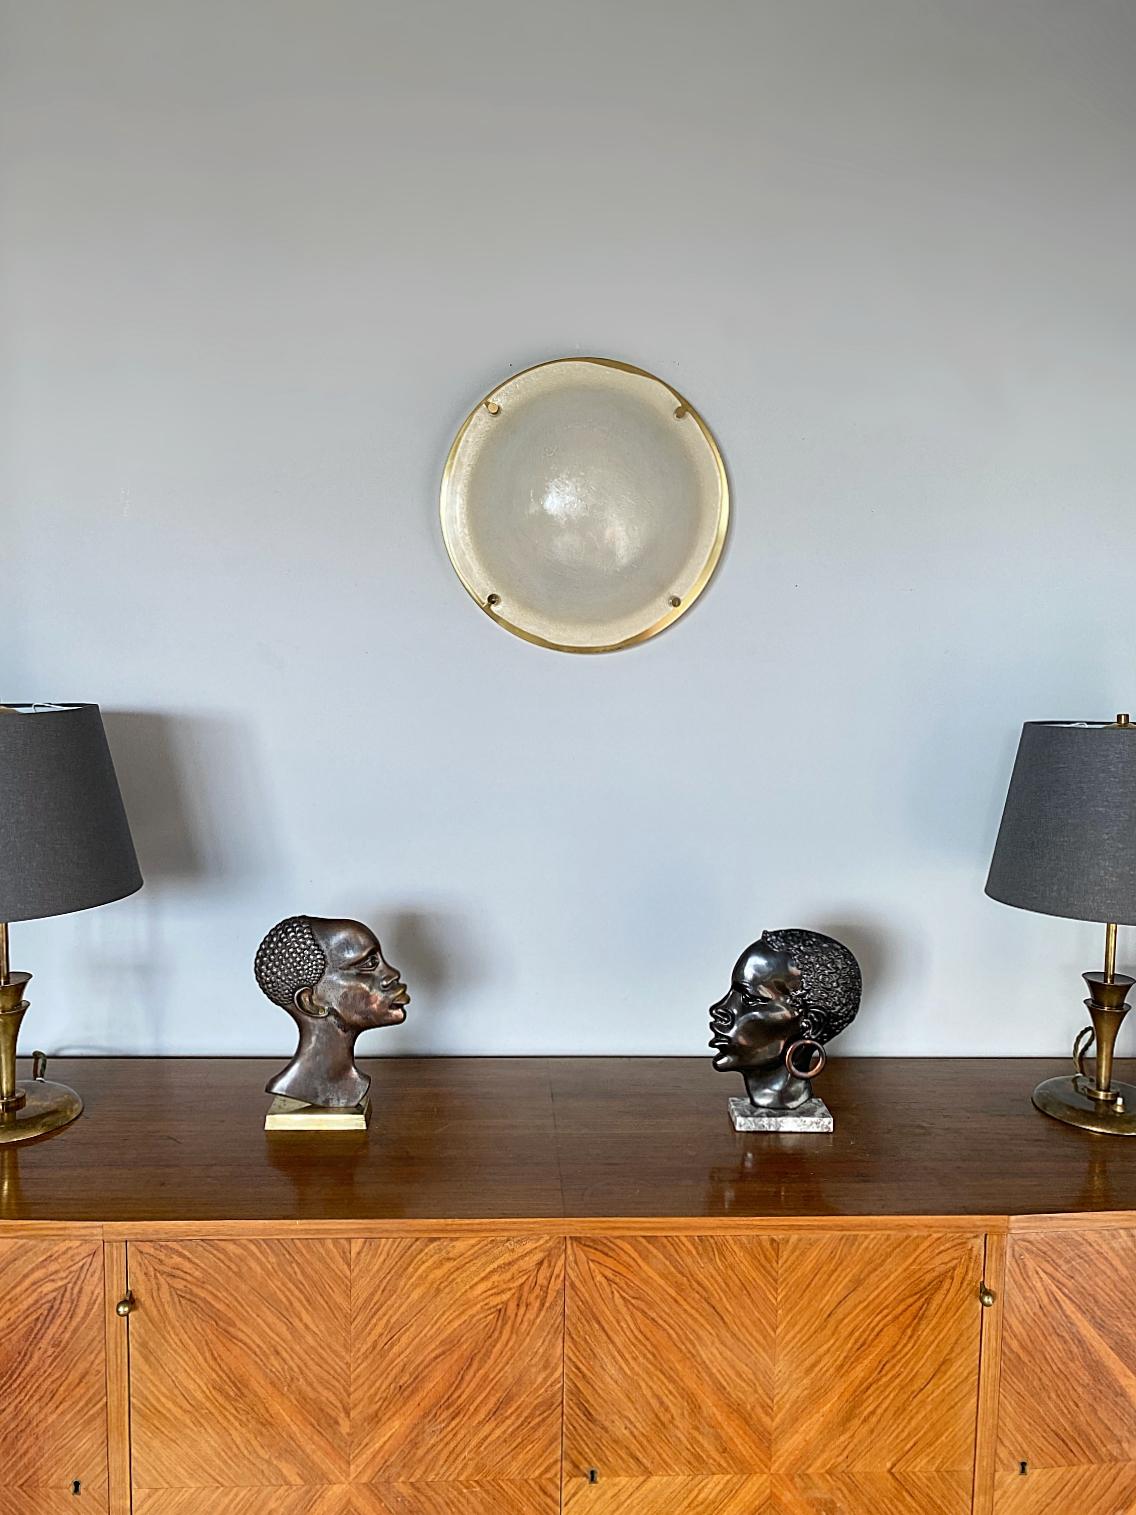 Iconic midcentury lamp made by Glashütte Limburg in the late 1970s. It's featuring thick Murano domed ice glass and polished brass hardware. It's in excellent condition with three Edison E27 sockets. It was one of the biggest flush mounts or wall